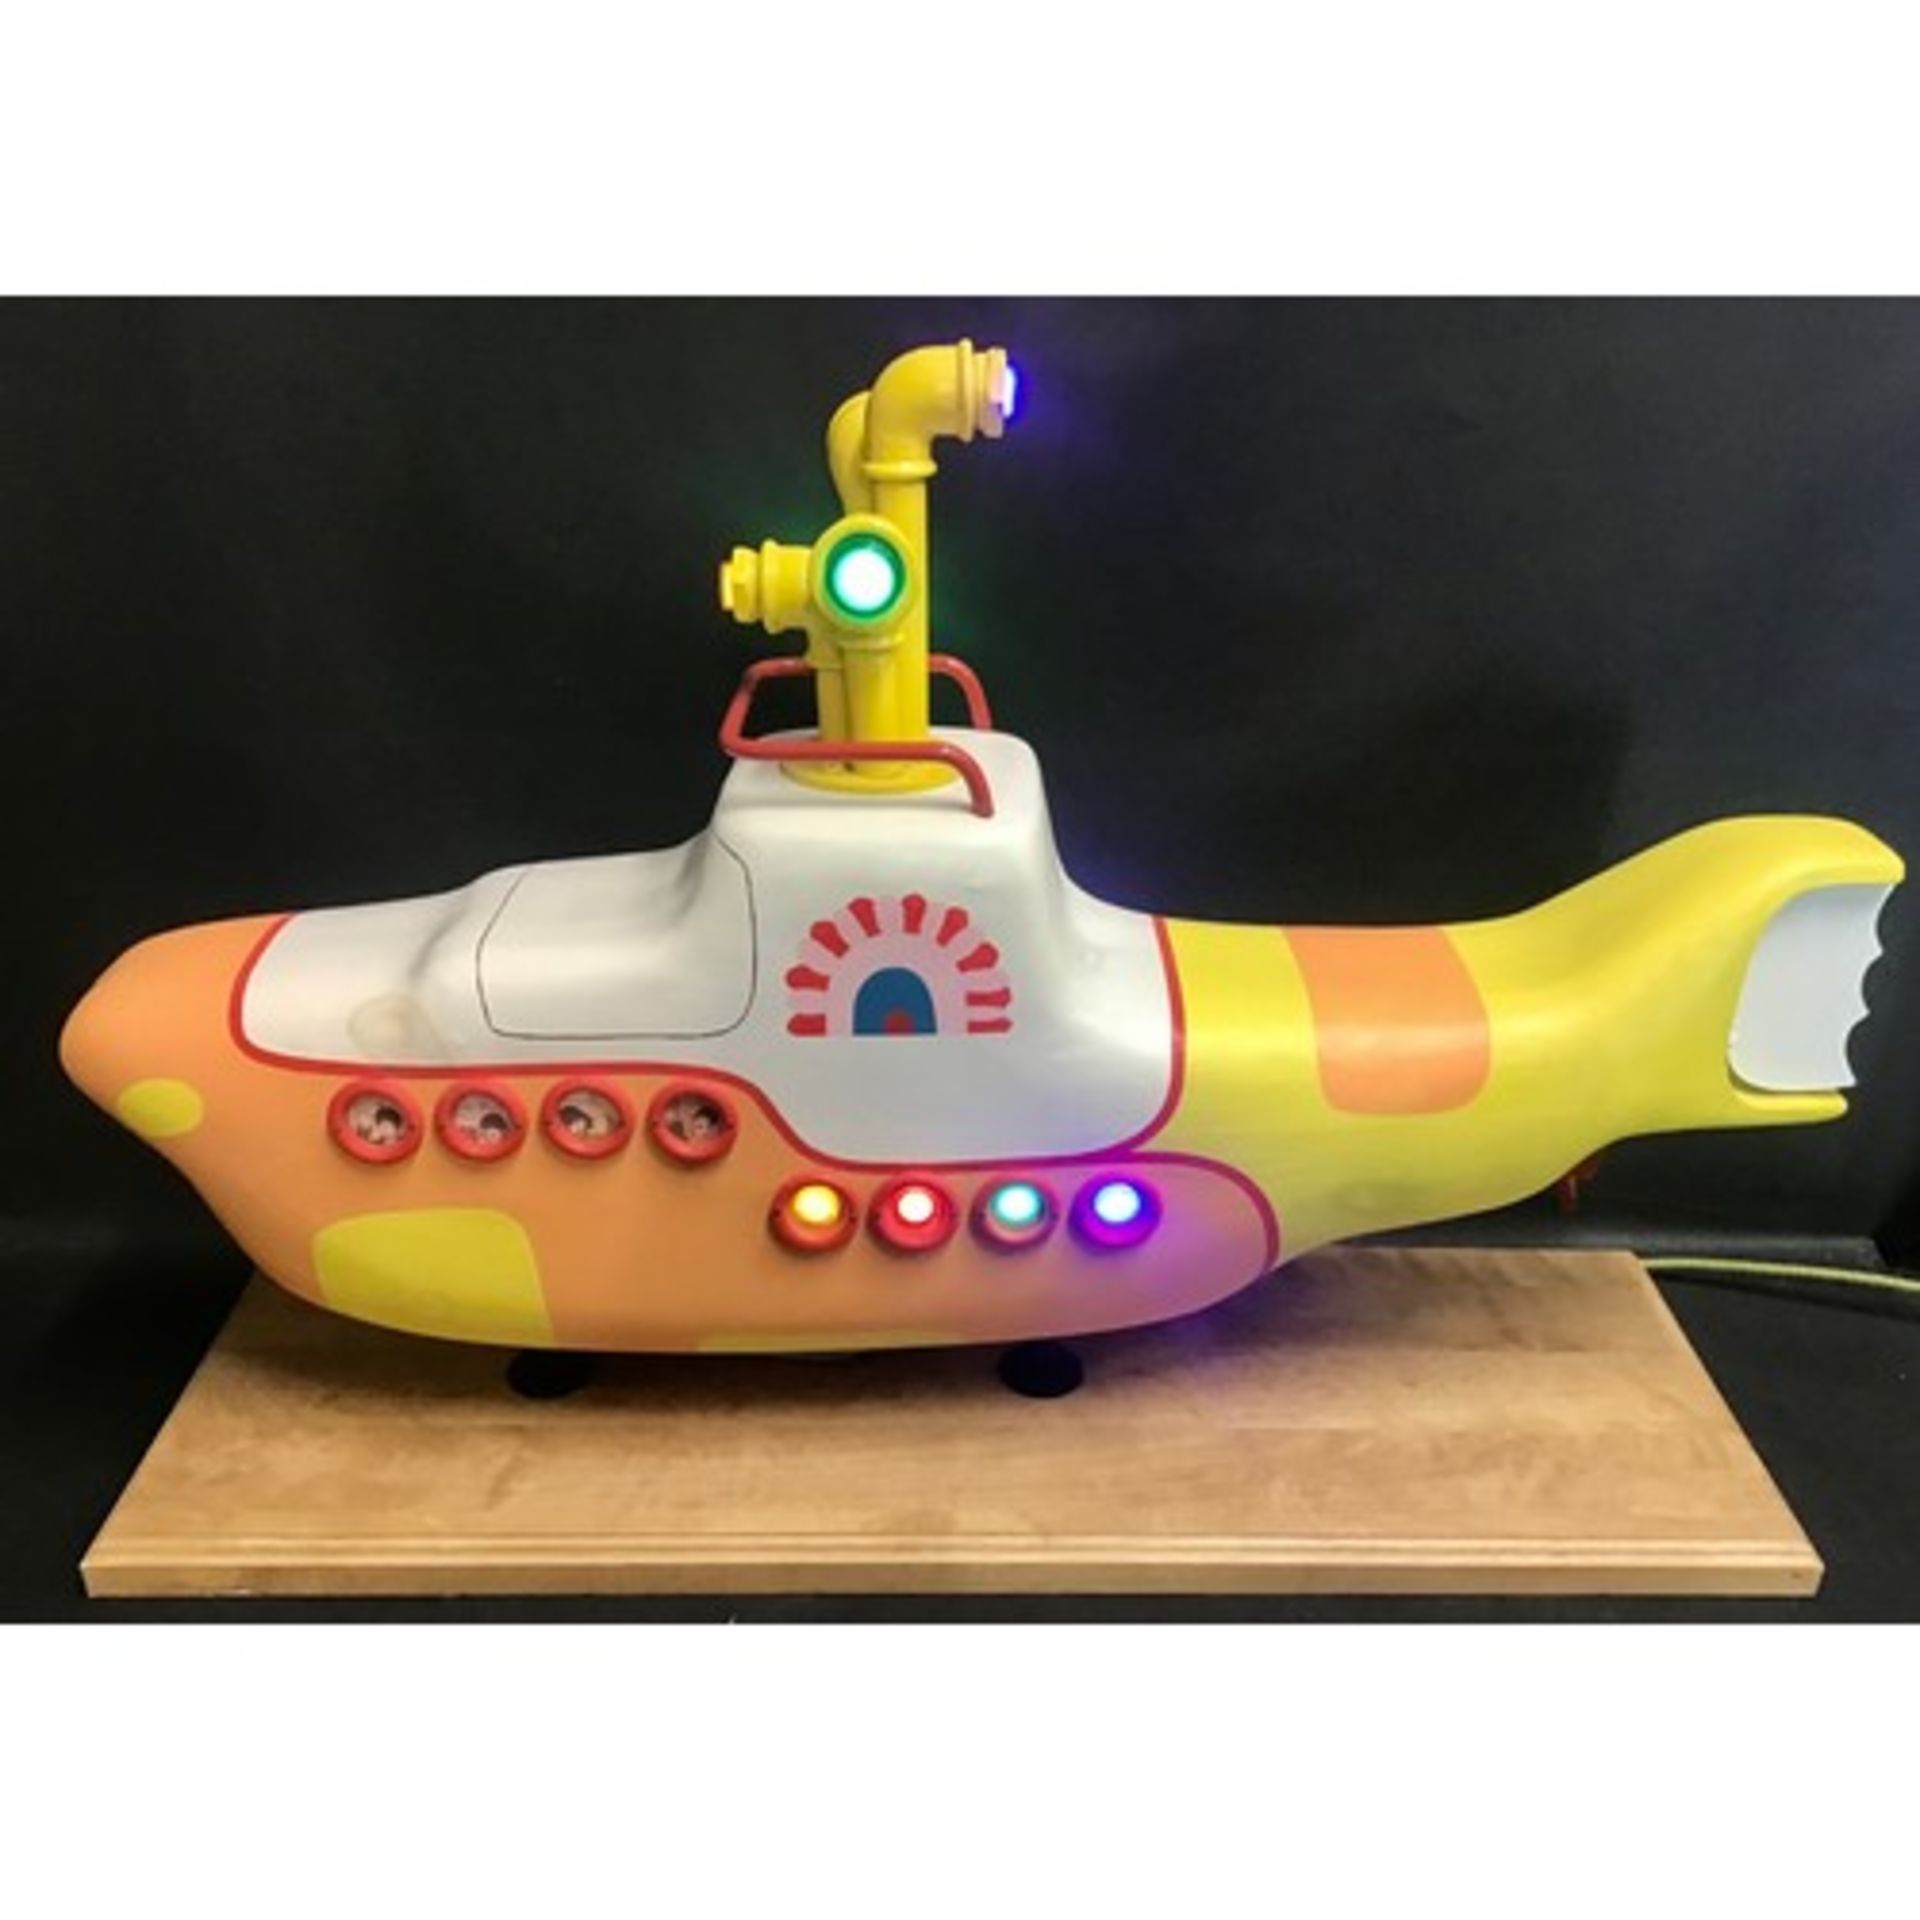 The Beatles one off Yellow Submarine carved wooden / metal reproduction model with working lights.